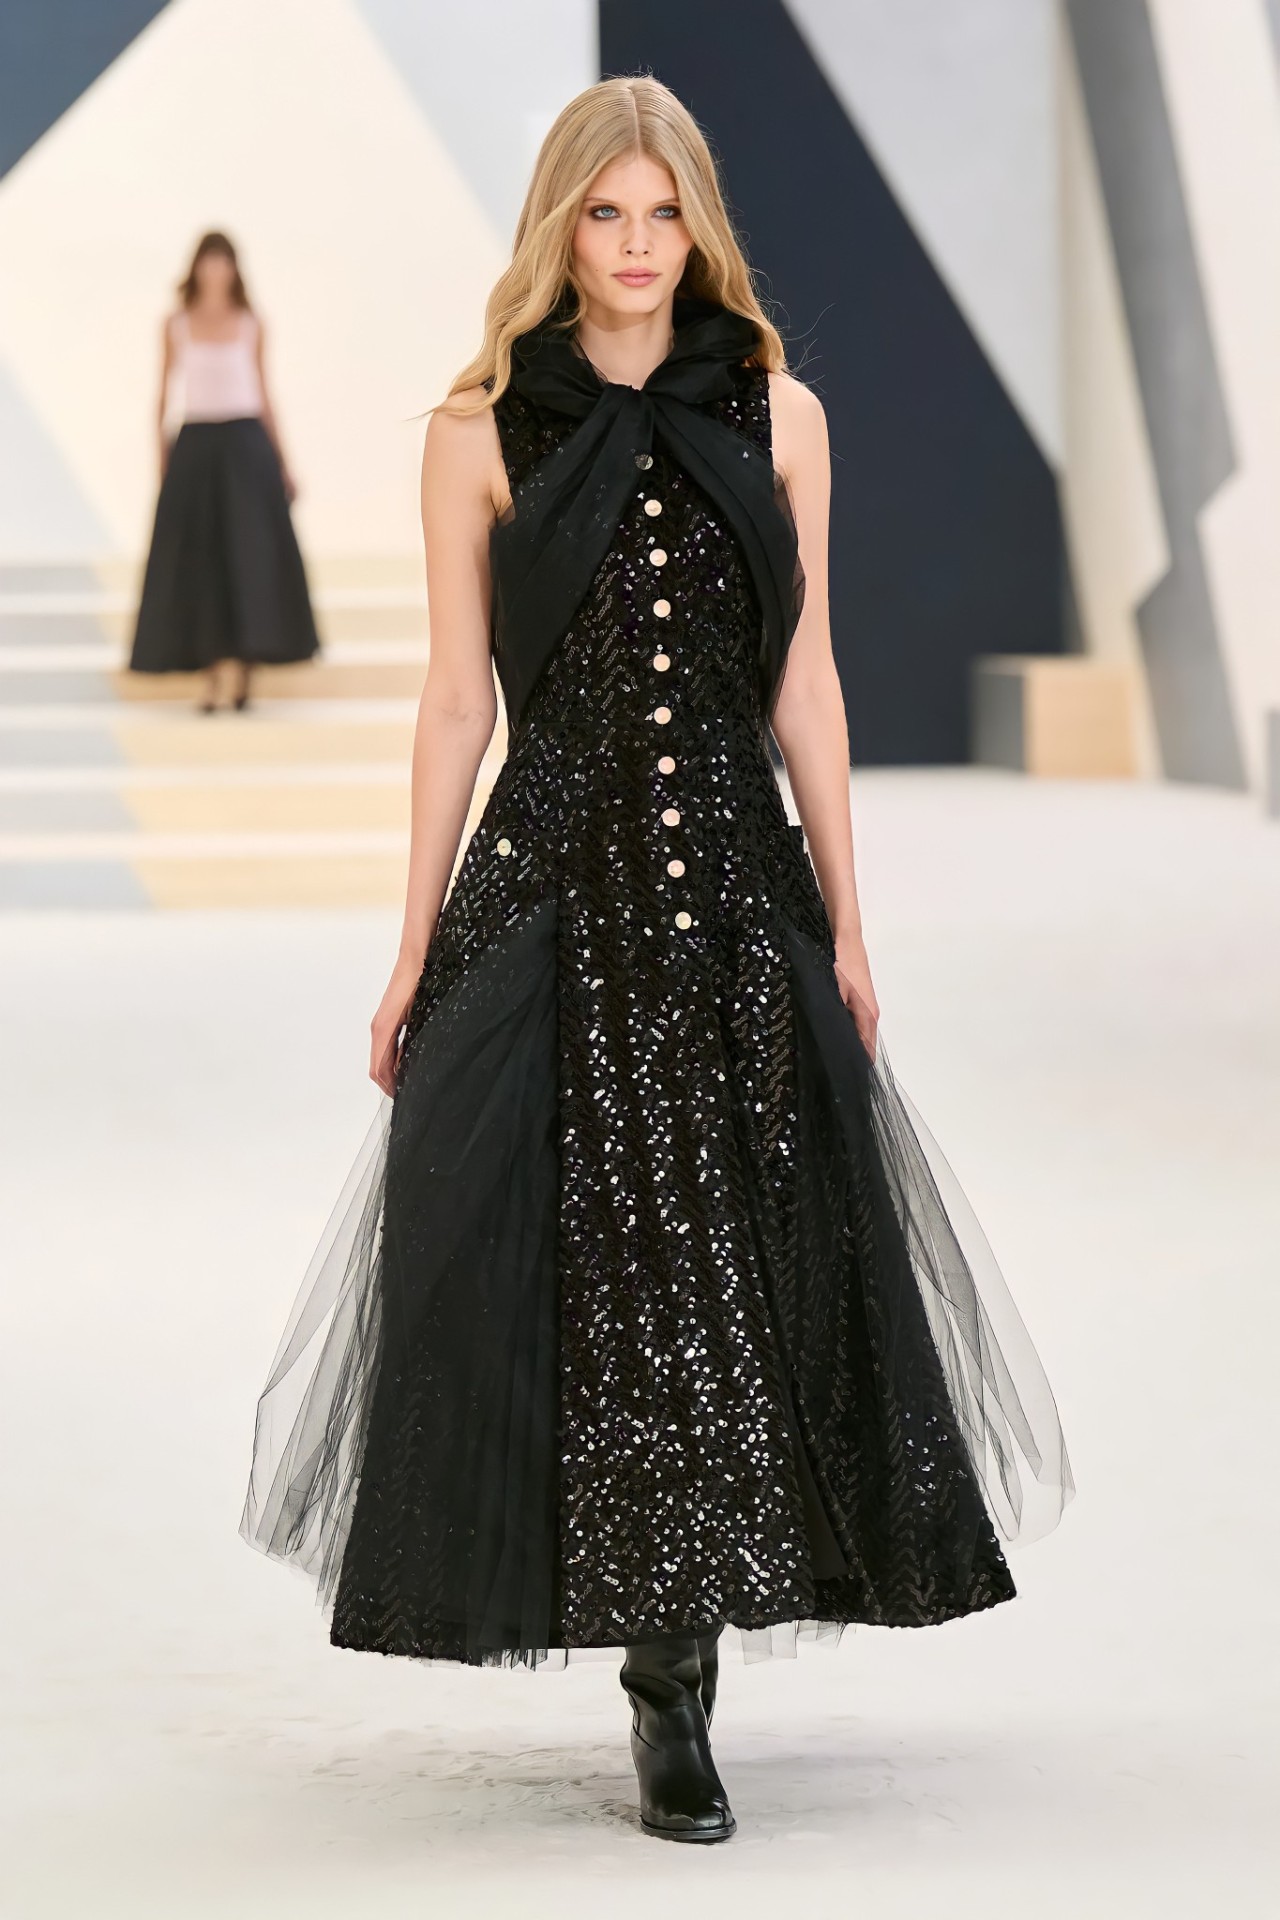 CHANEL Fall-Winter 2022/23 Haute Couture – The Laterals